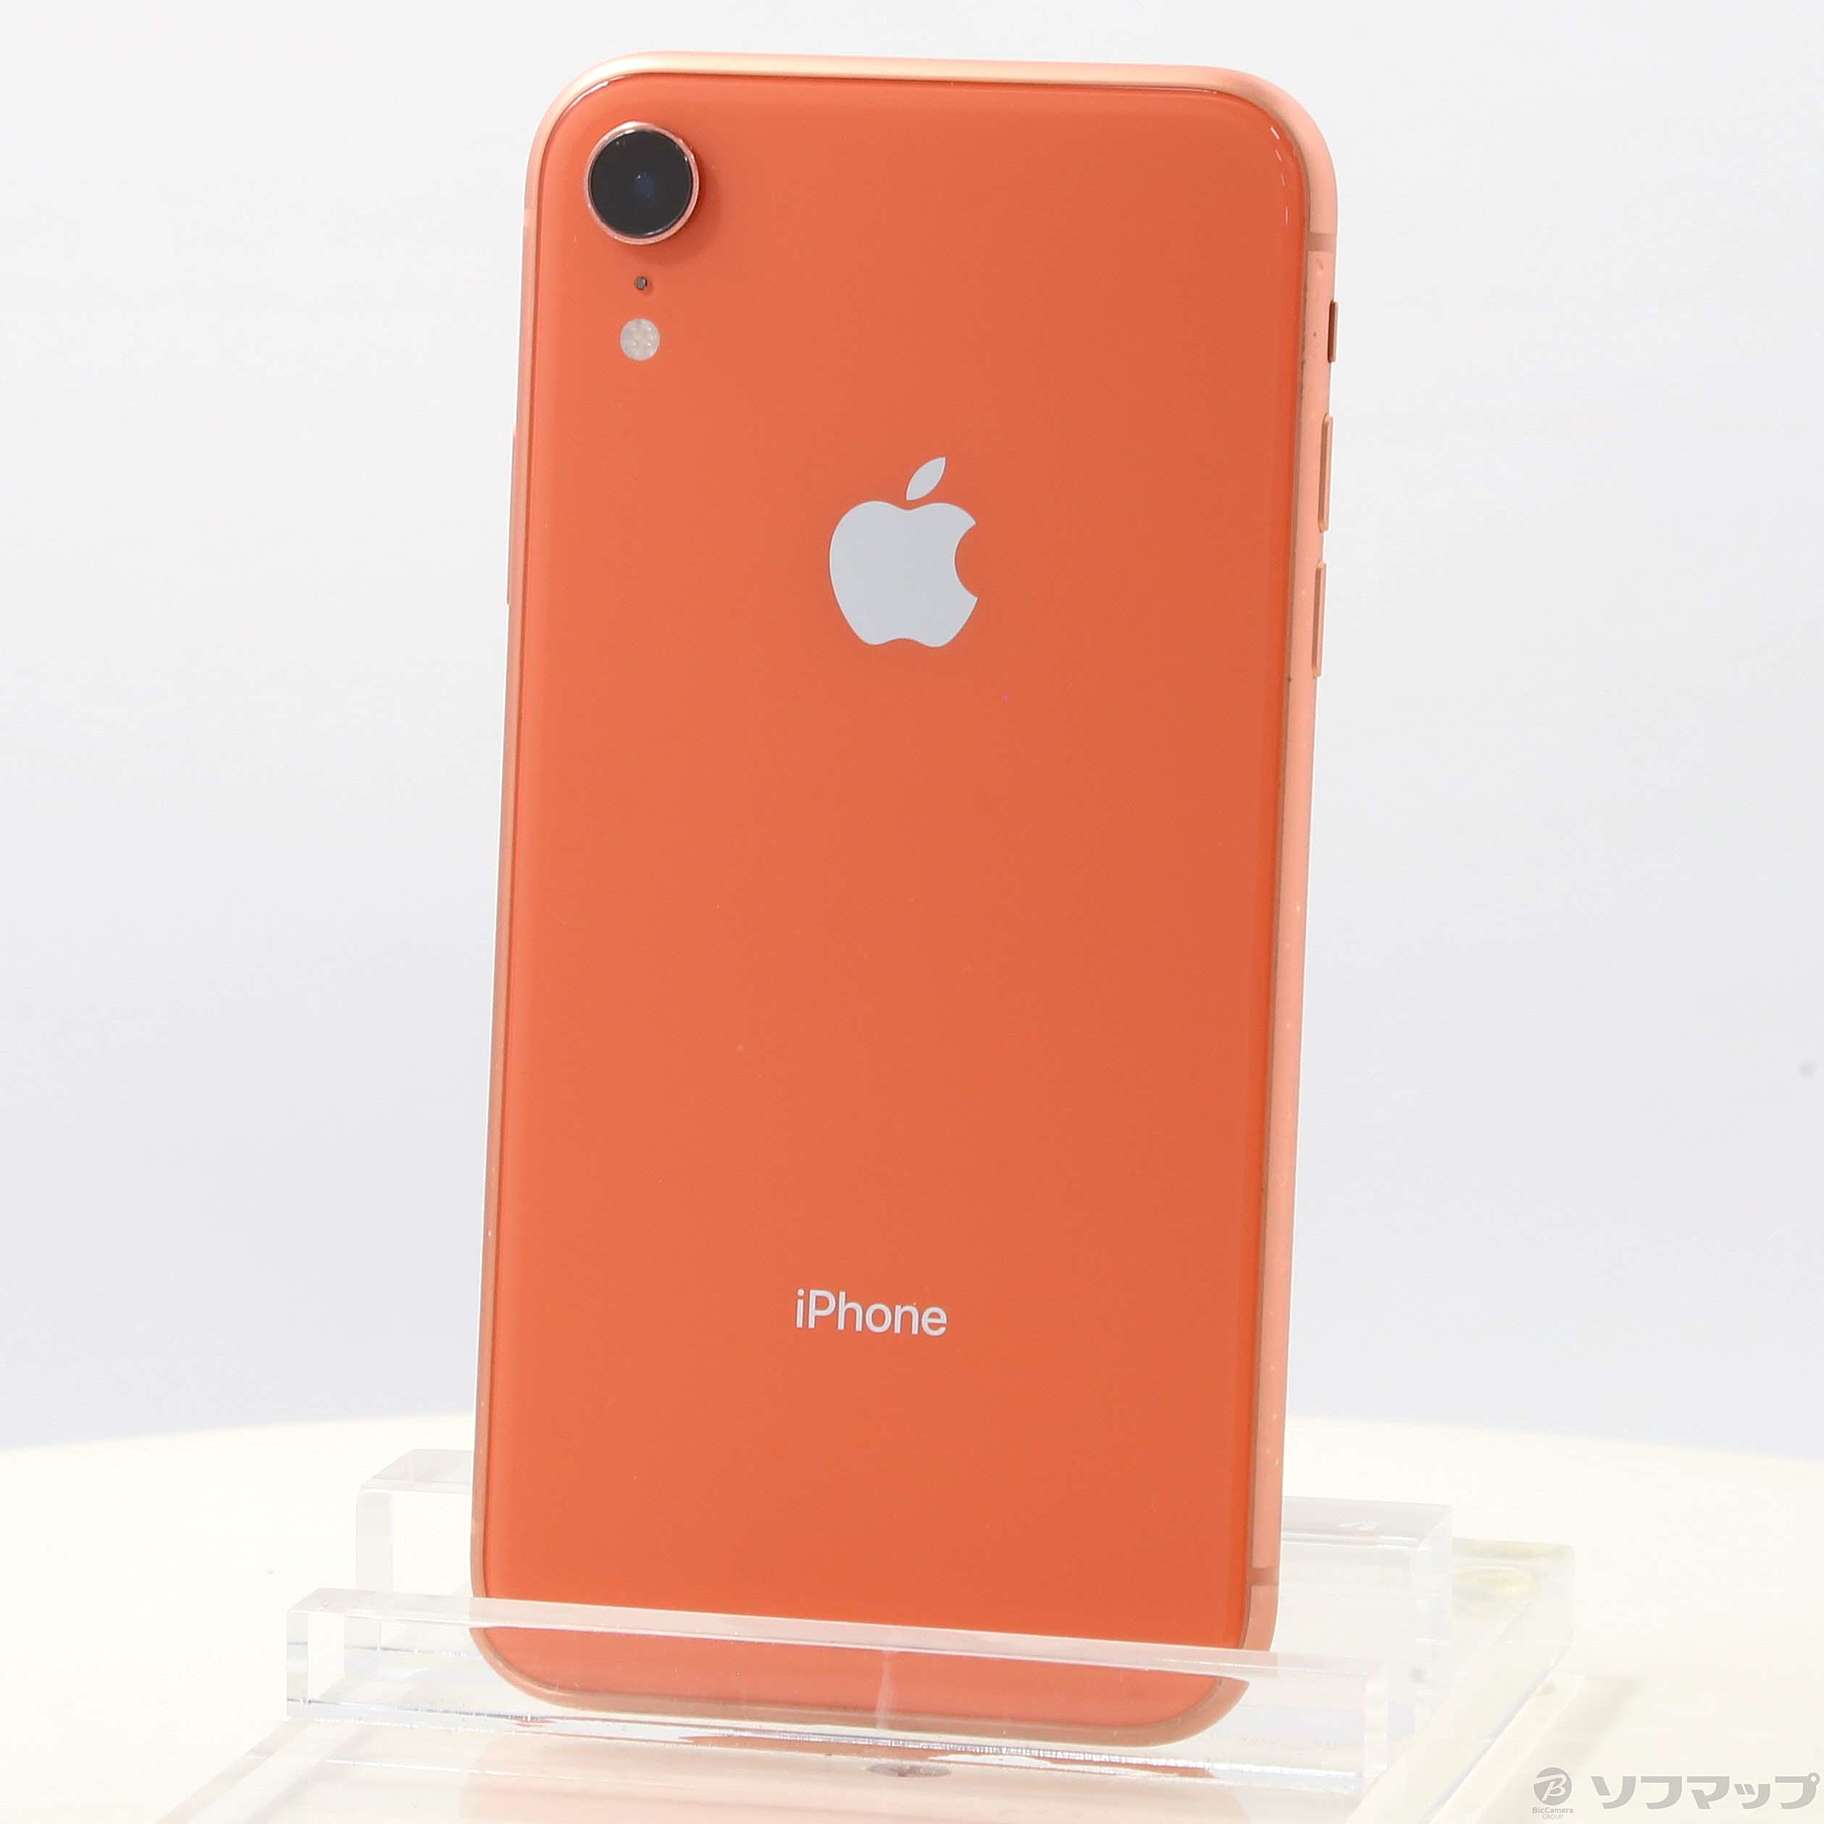 iPhone XR 128GB Coral